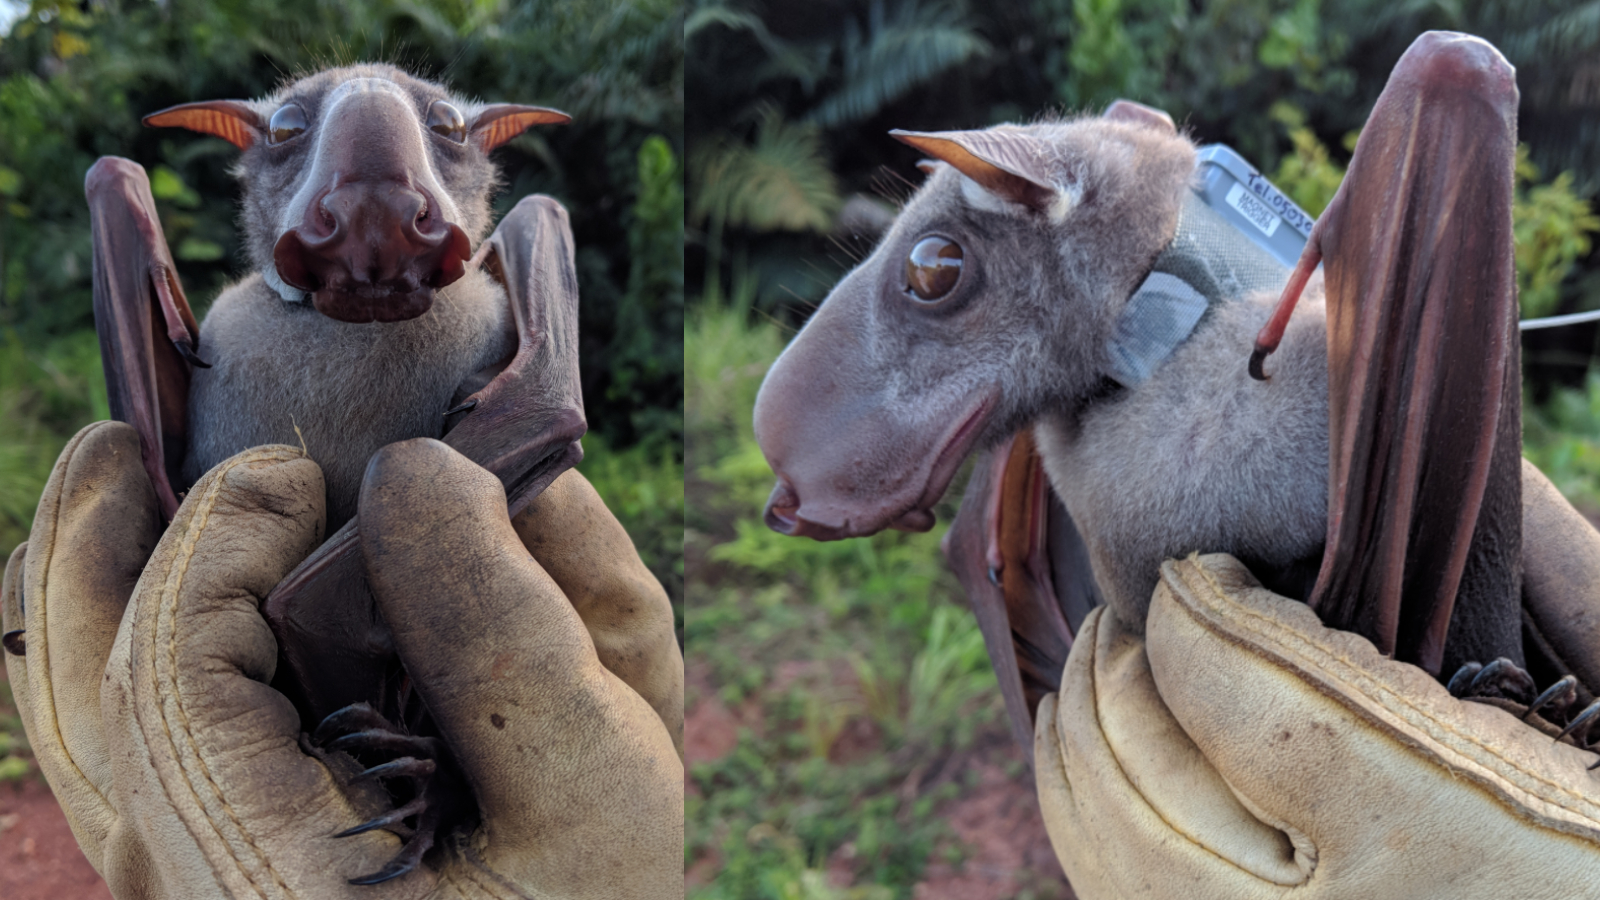 Hammer-headed bat: The African megabat that looks like a gargoyle and holds honking pageants